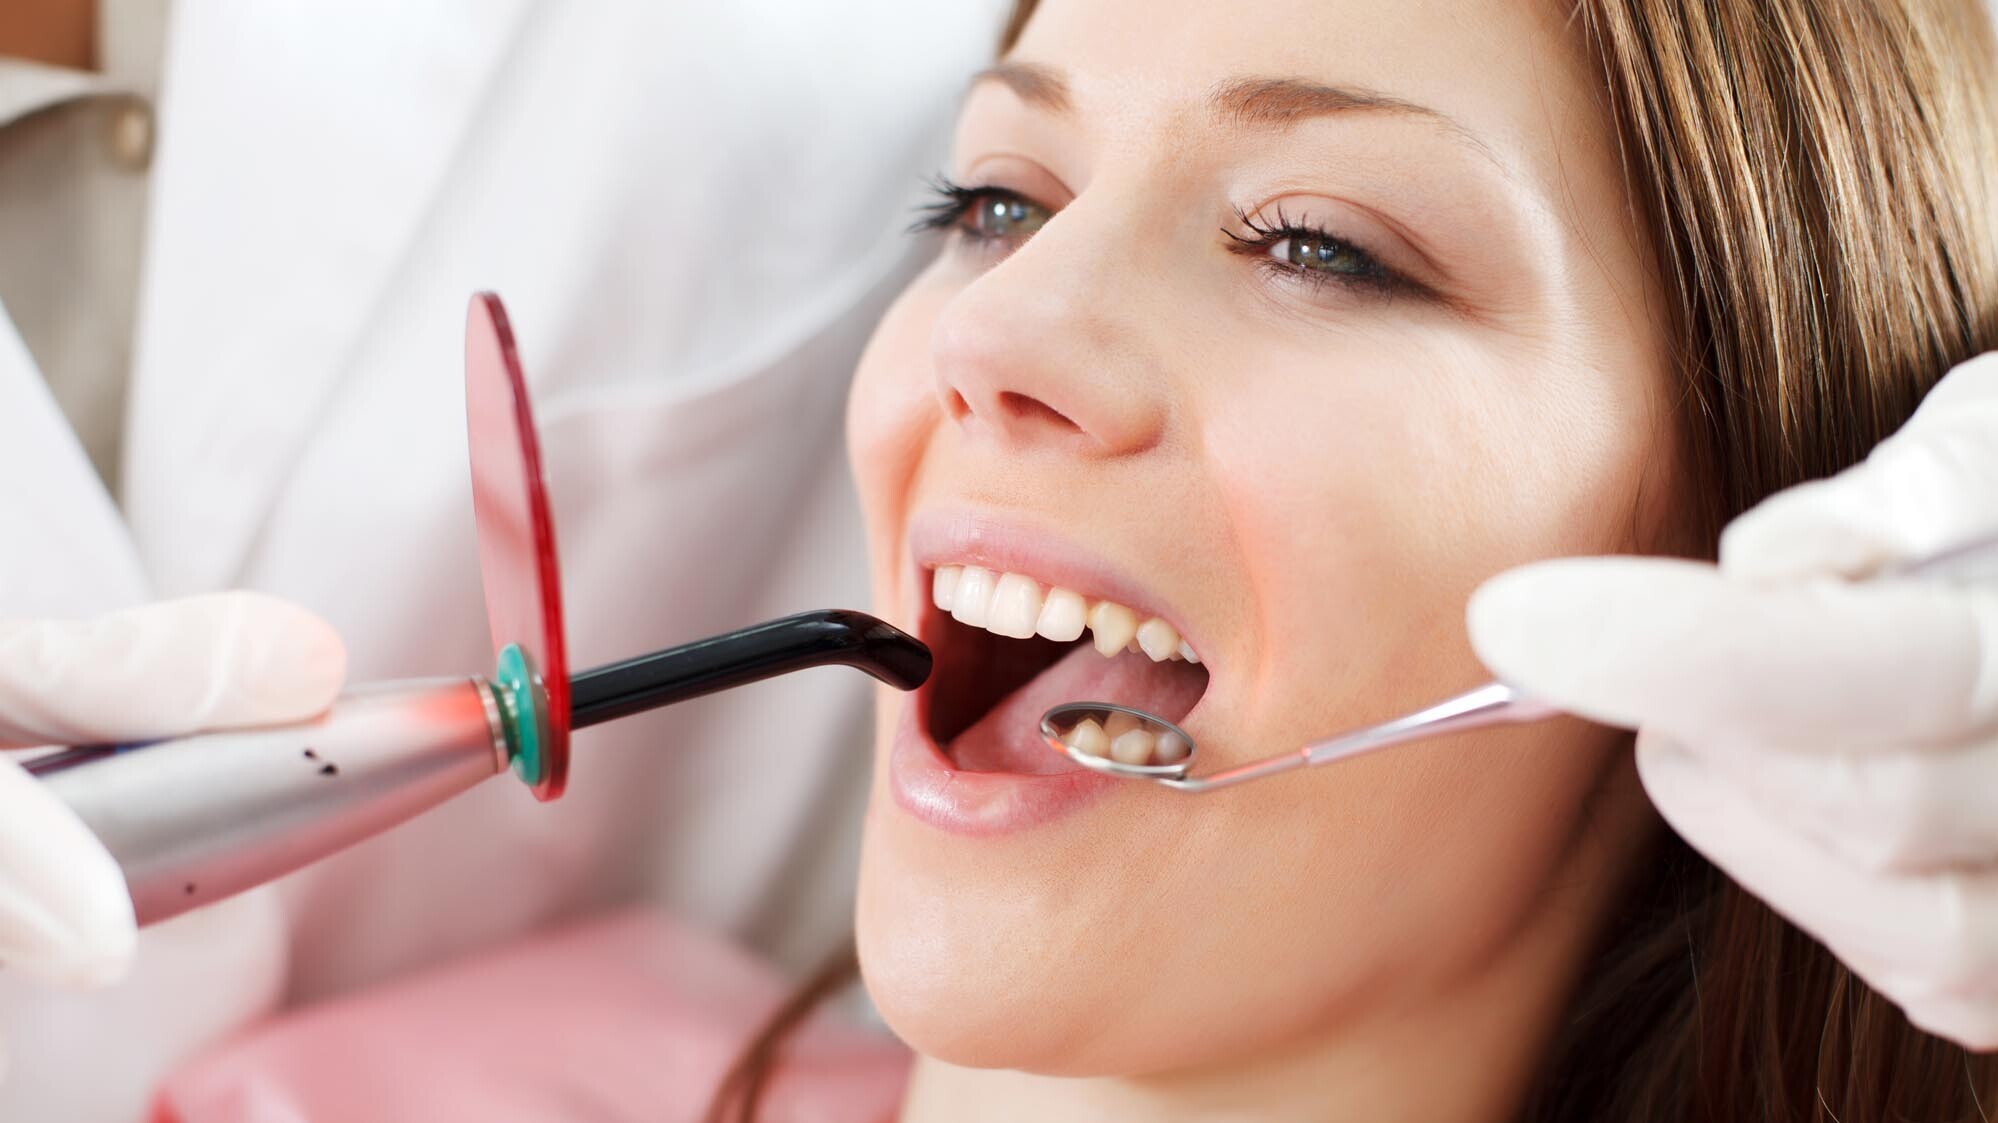 "Beautiful, Adult, Caucasian, Cheerful, Clinic, Close-up, Dental Equipment, Dental Filling, Dentist, Dentist Office, Doctor, Equipment, Examining, Female, Gums", Healthcare And Medicine, Holding, Horizontal, Human Face, Human Mouth, Human Teeth, Indoors, Looking, Medical Exam, Medical Laser, Medical Procedure, Medicine, Mid Adult, Mirror, Nurse, Occupation, Open, Opening, Paramedic, Patient, People, Professional Occupation, Protective Glove, Scrutiny, Sitting, Toothache, Ultraviolet Light, Visit, Women, Young Adult